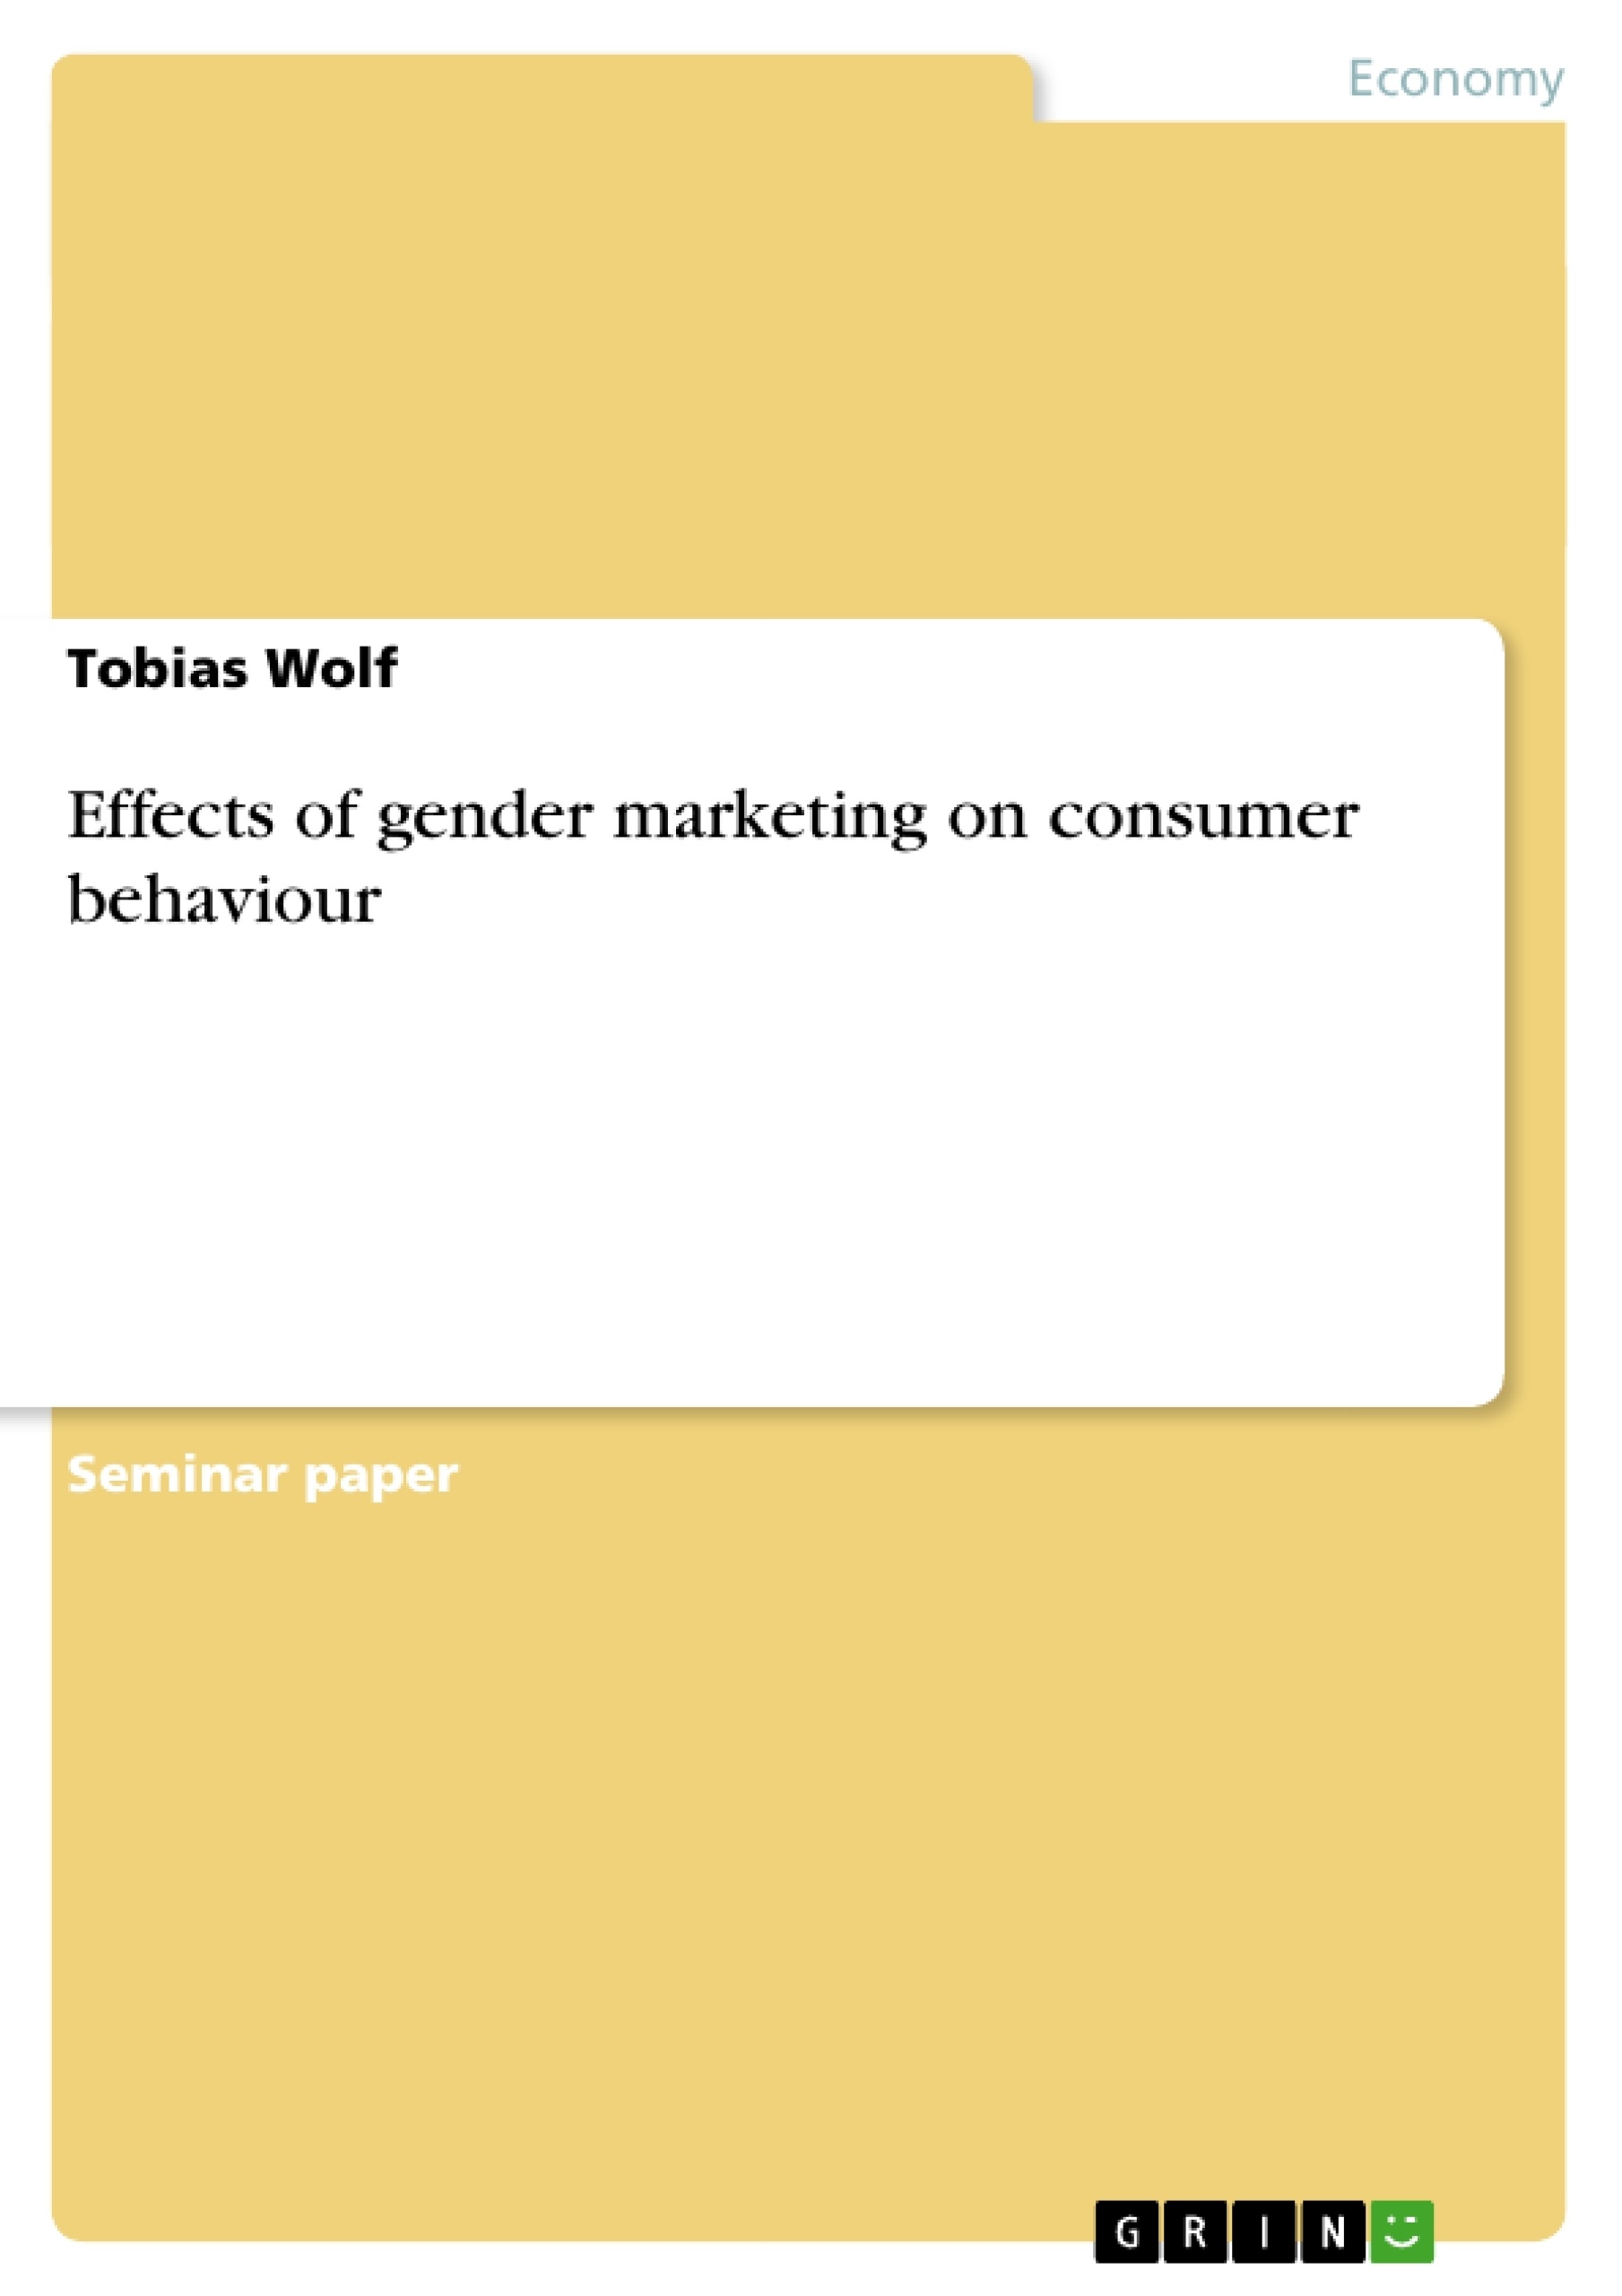 Title: Effects of gender marketing on consumer behaviour